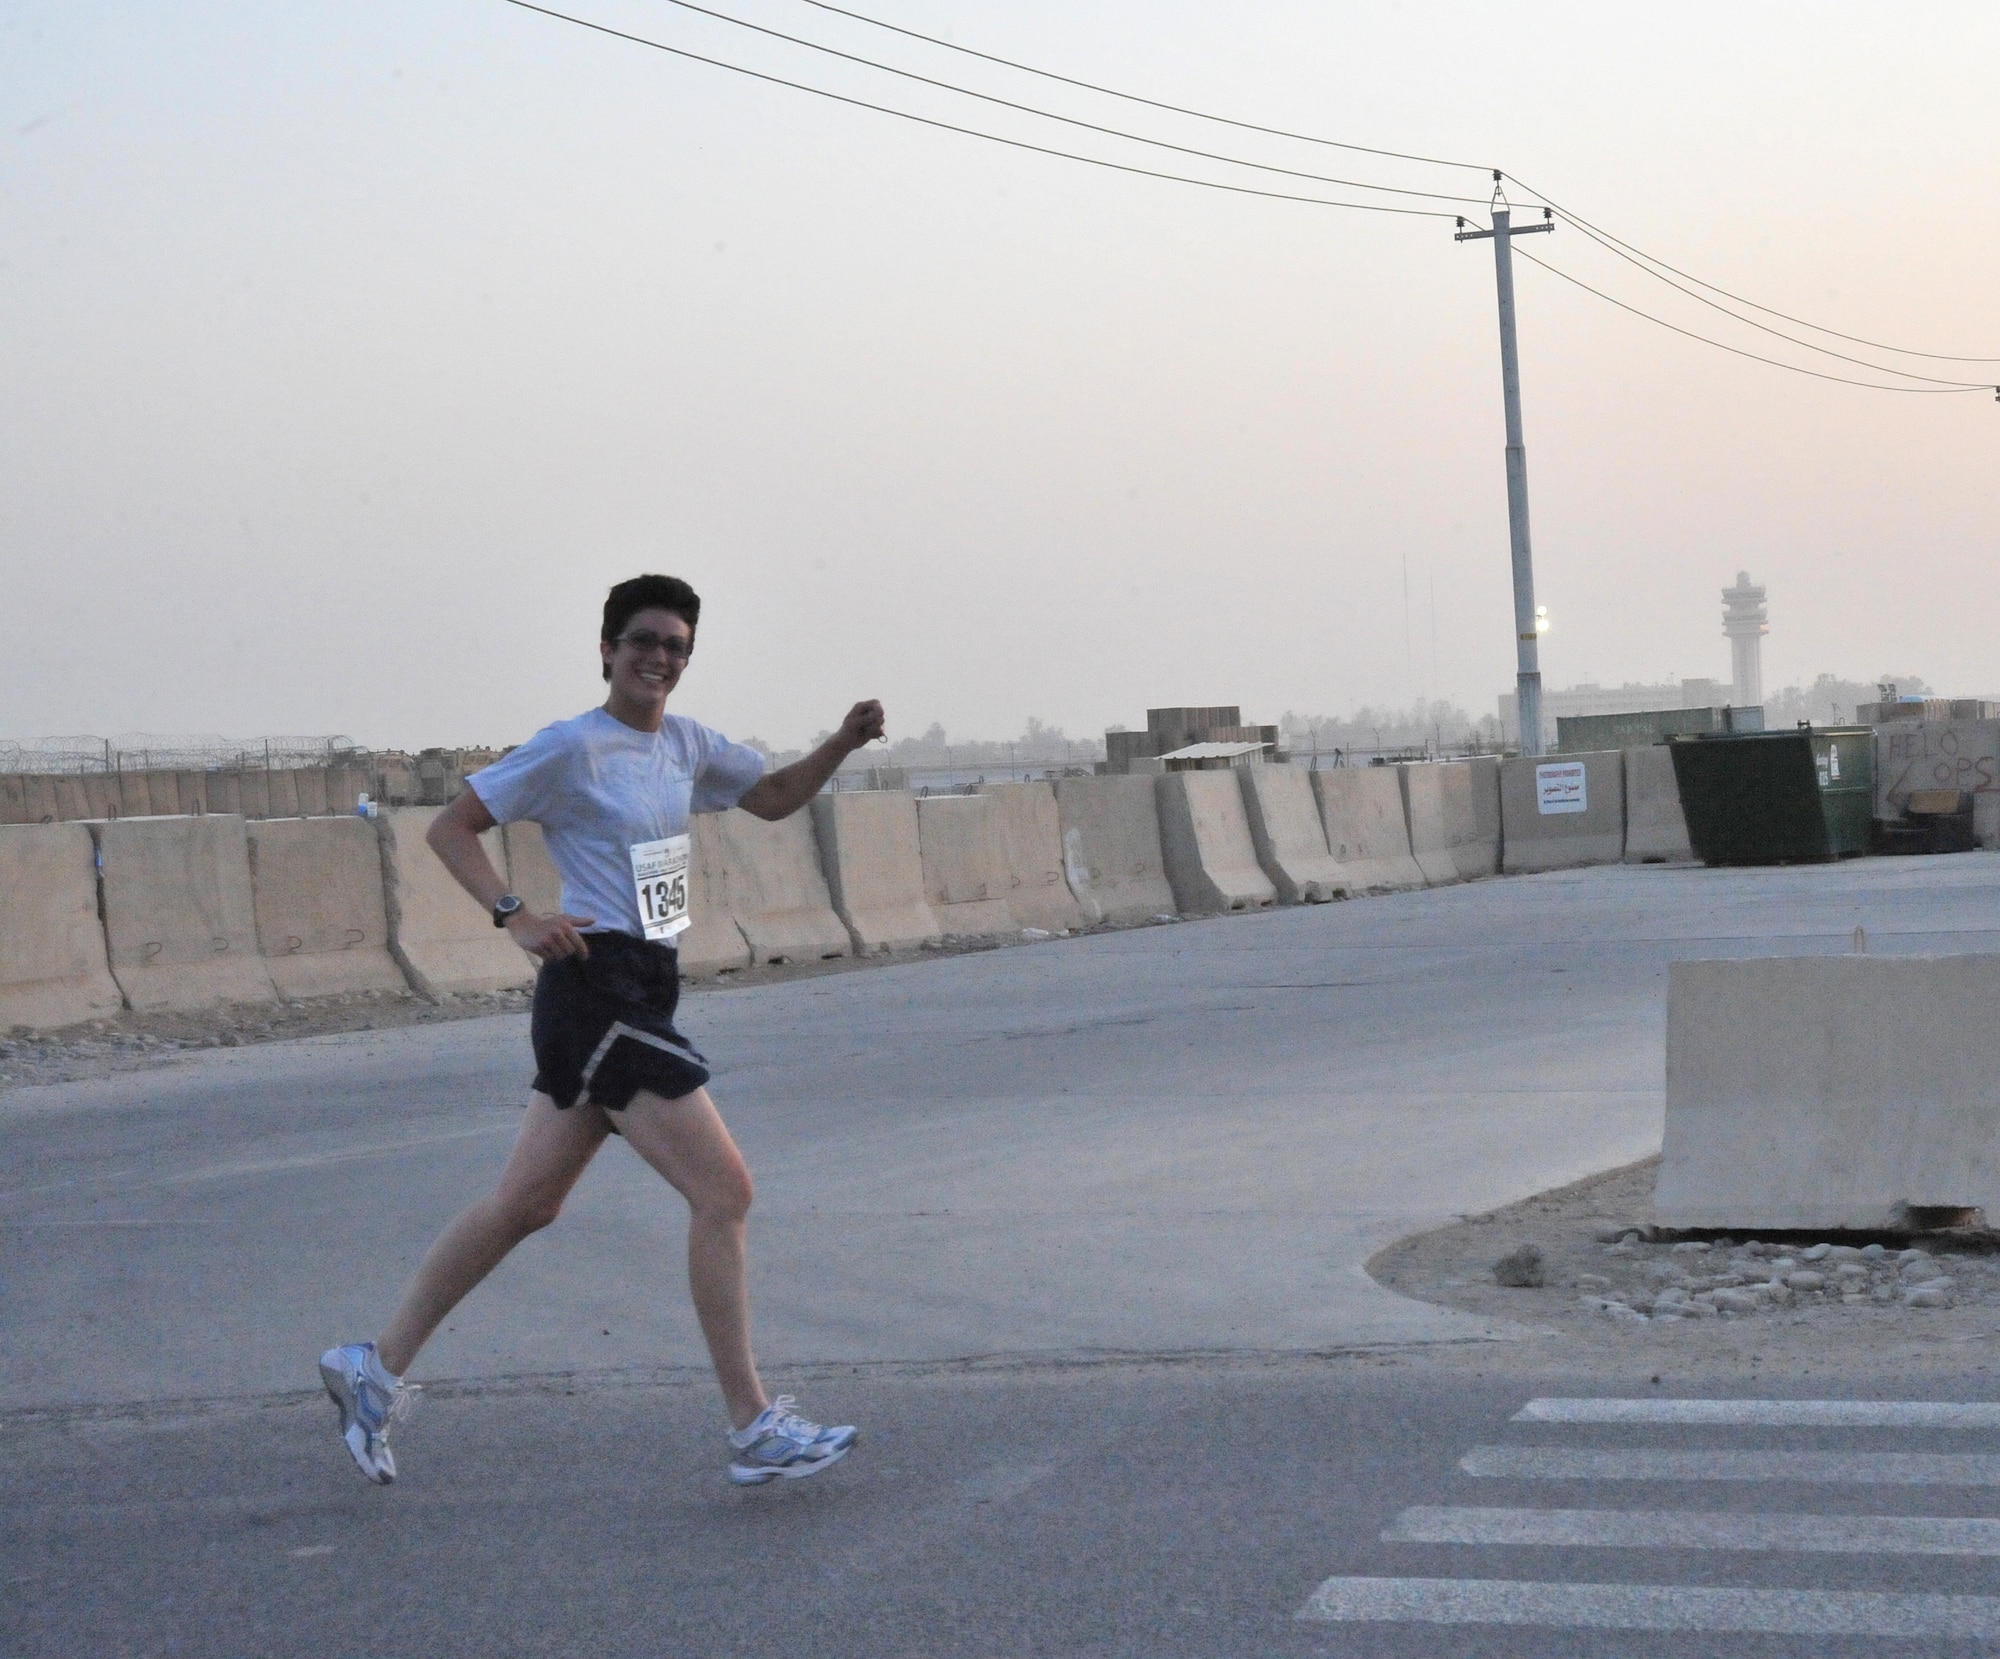 SATHER AIR BASE, Iraq -- Capt. Kelly Neuenfeldt, 447th Expeditionary Security Force Squadron, took second place in Sather's Air Force Marathon 10K running it in 54 minutes and 32 seconds Sept. 5.  (U.S. Air Force photo/Staff Sgt. Misty D. Slater)